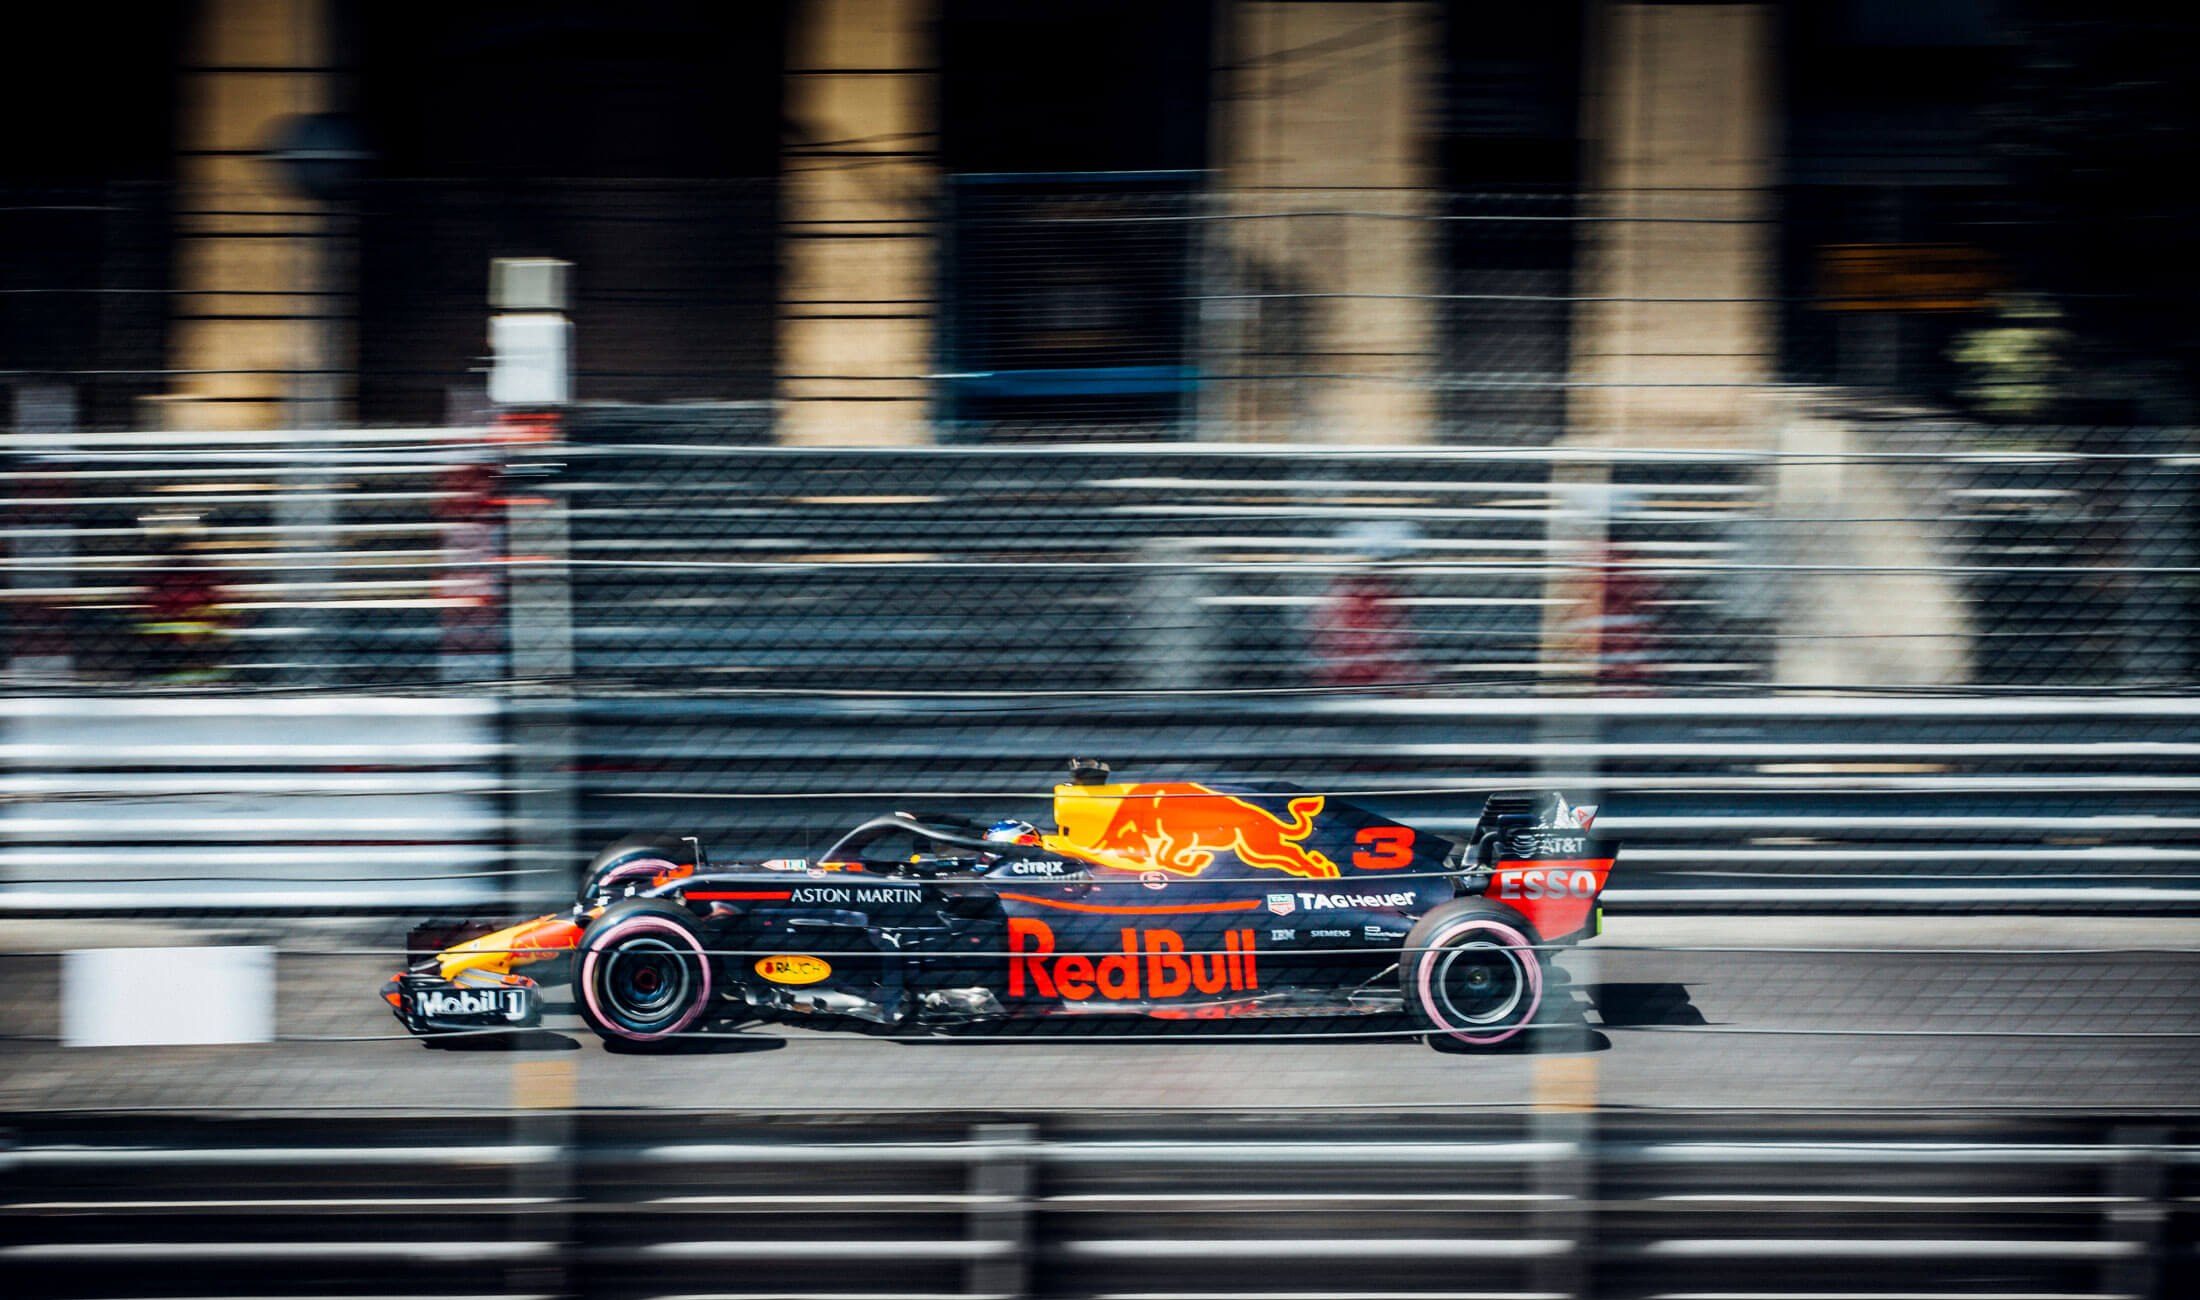 Red Bull F1 car on the track in Monaco